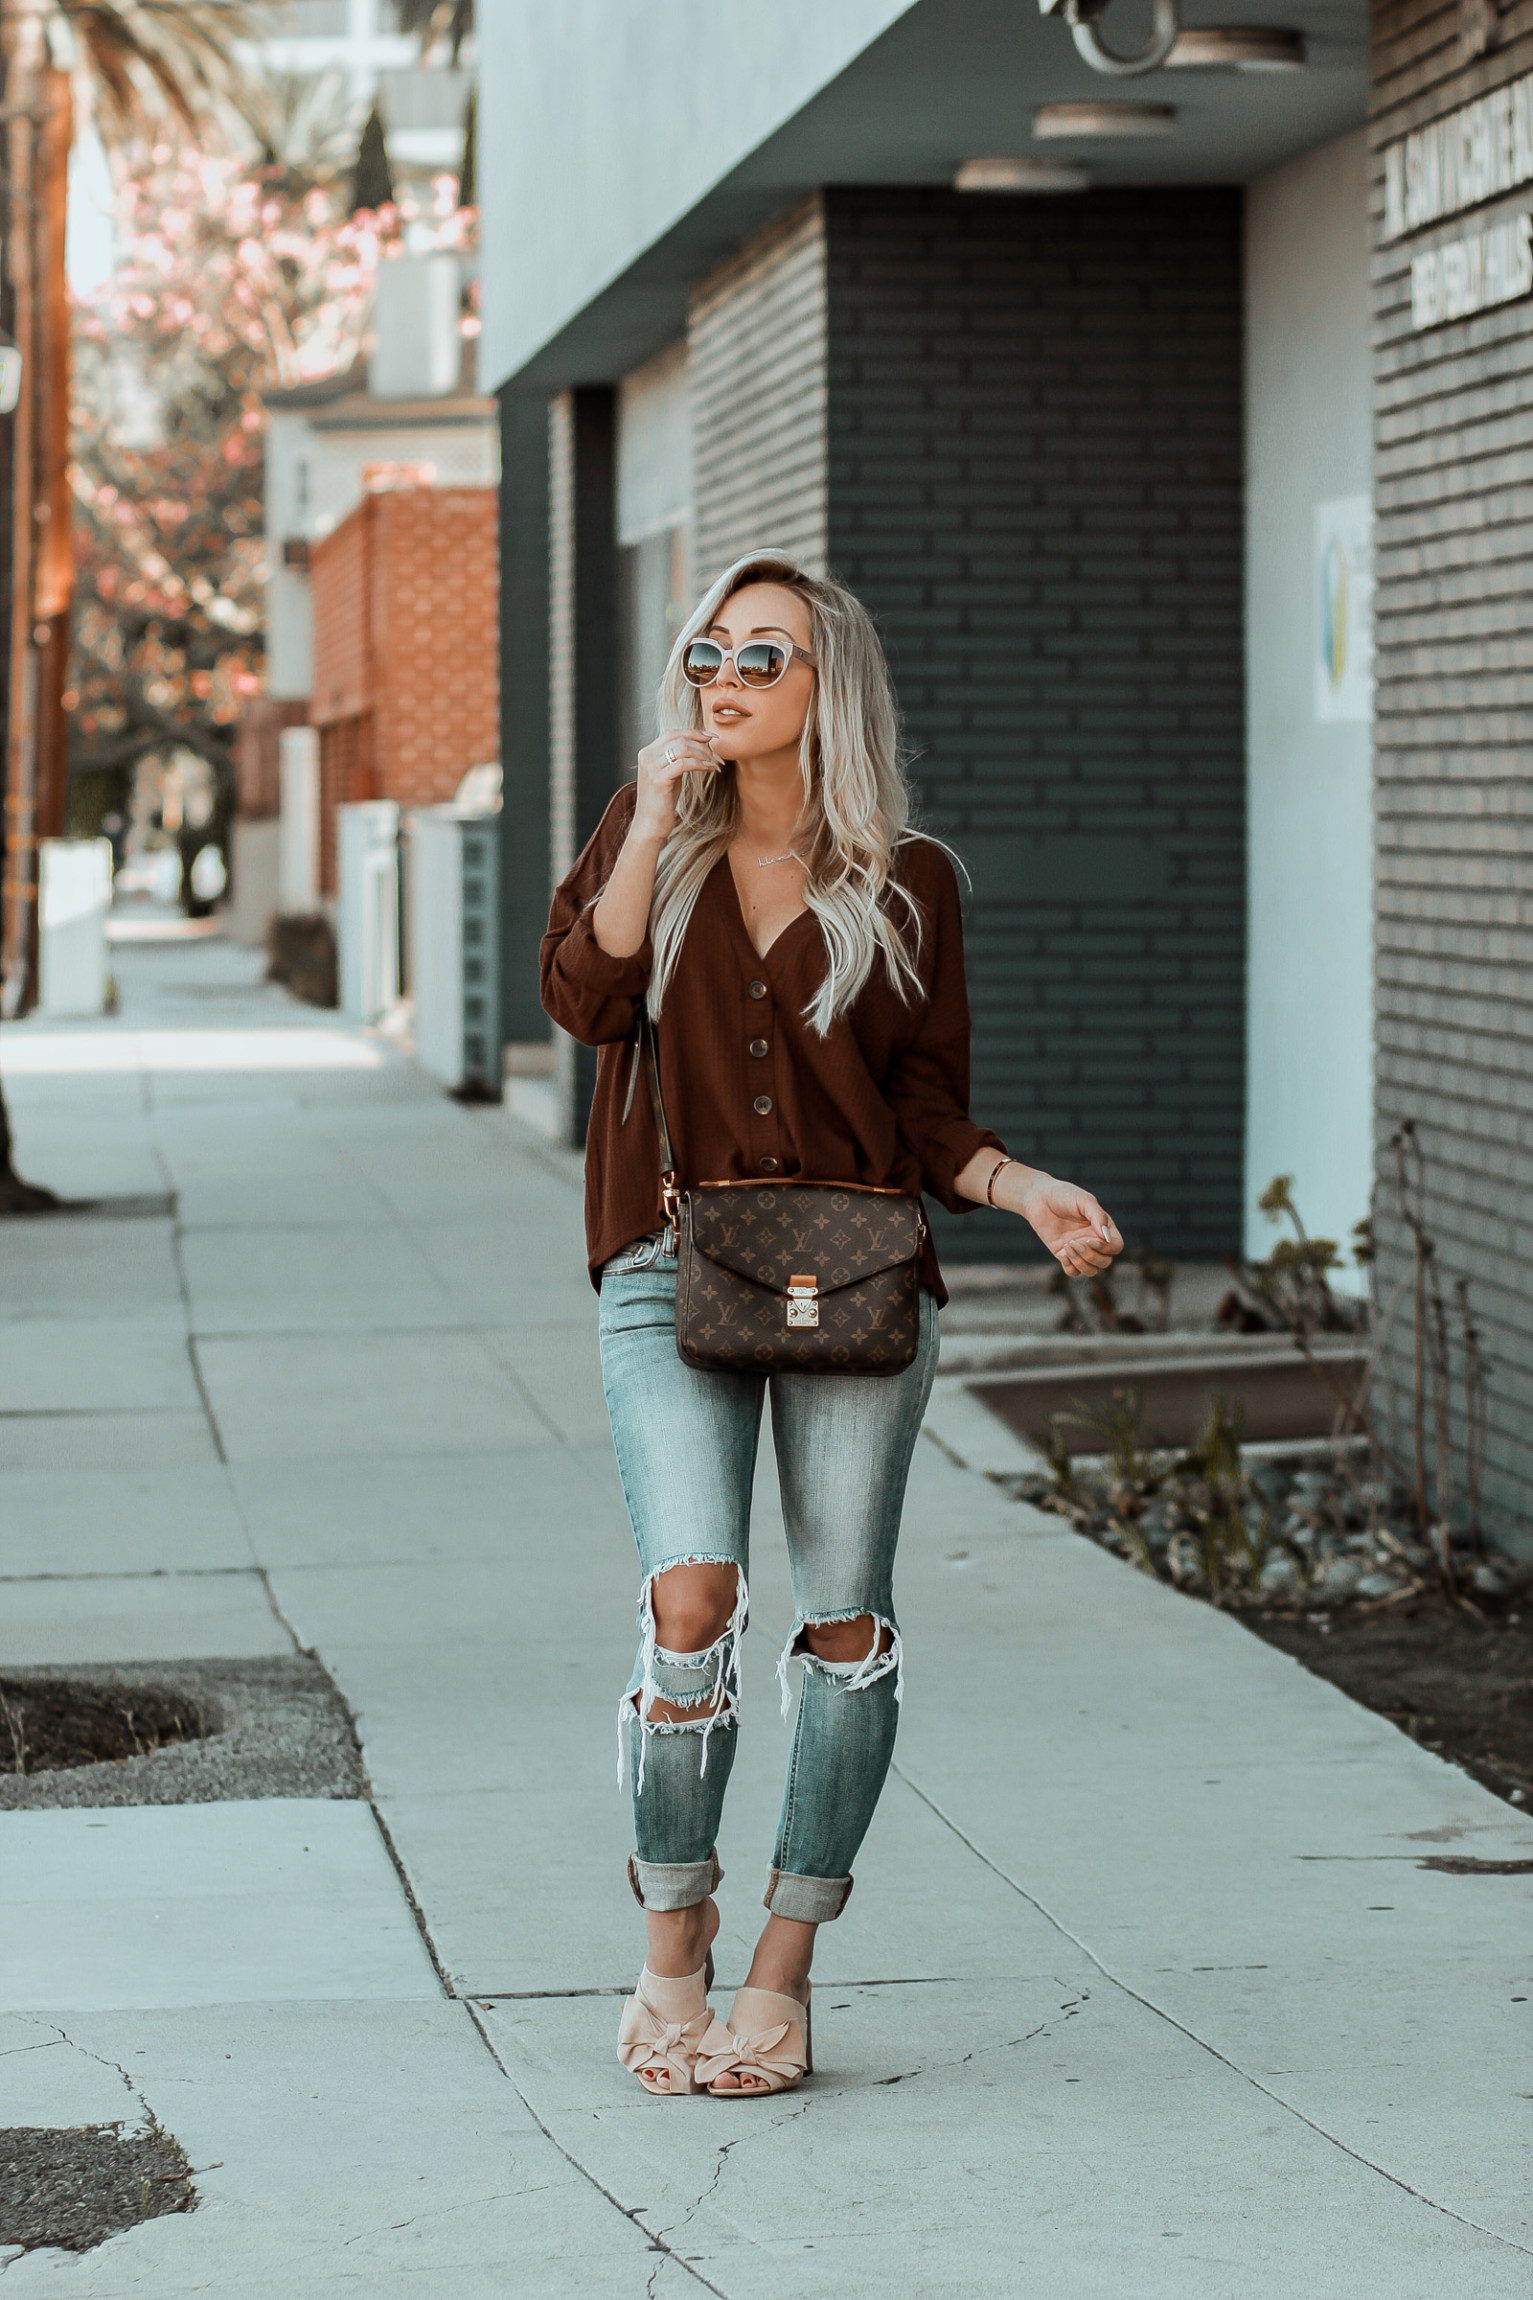 Brown Button Sweater for Fall | Fall Vibes | Distressed Jeans | Louis Vuitton Pochette Metis | Fall Fashion inspo | Blondie in the City by Hayley Larue